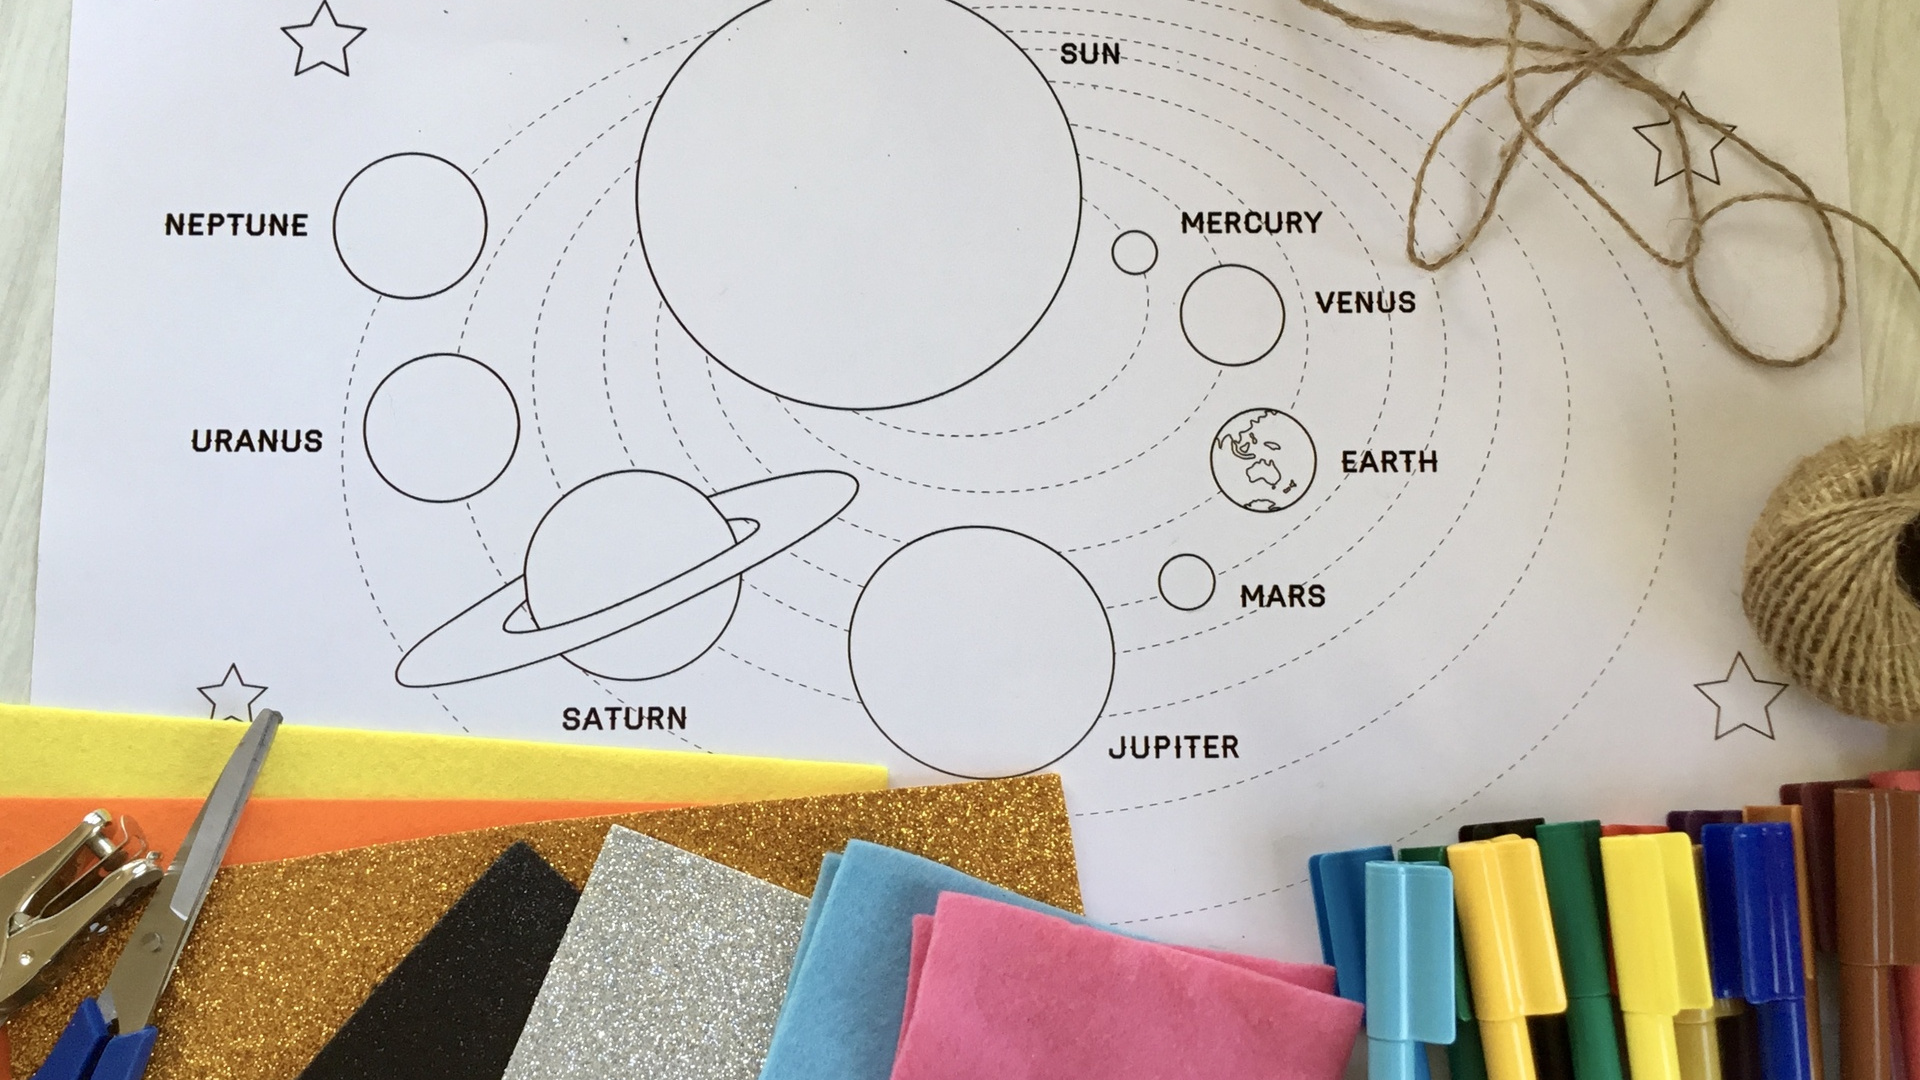 Solar System Planets in Order from the Sun | Full Guide